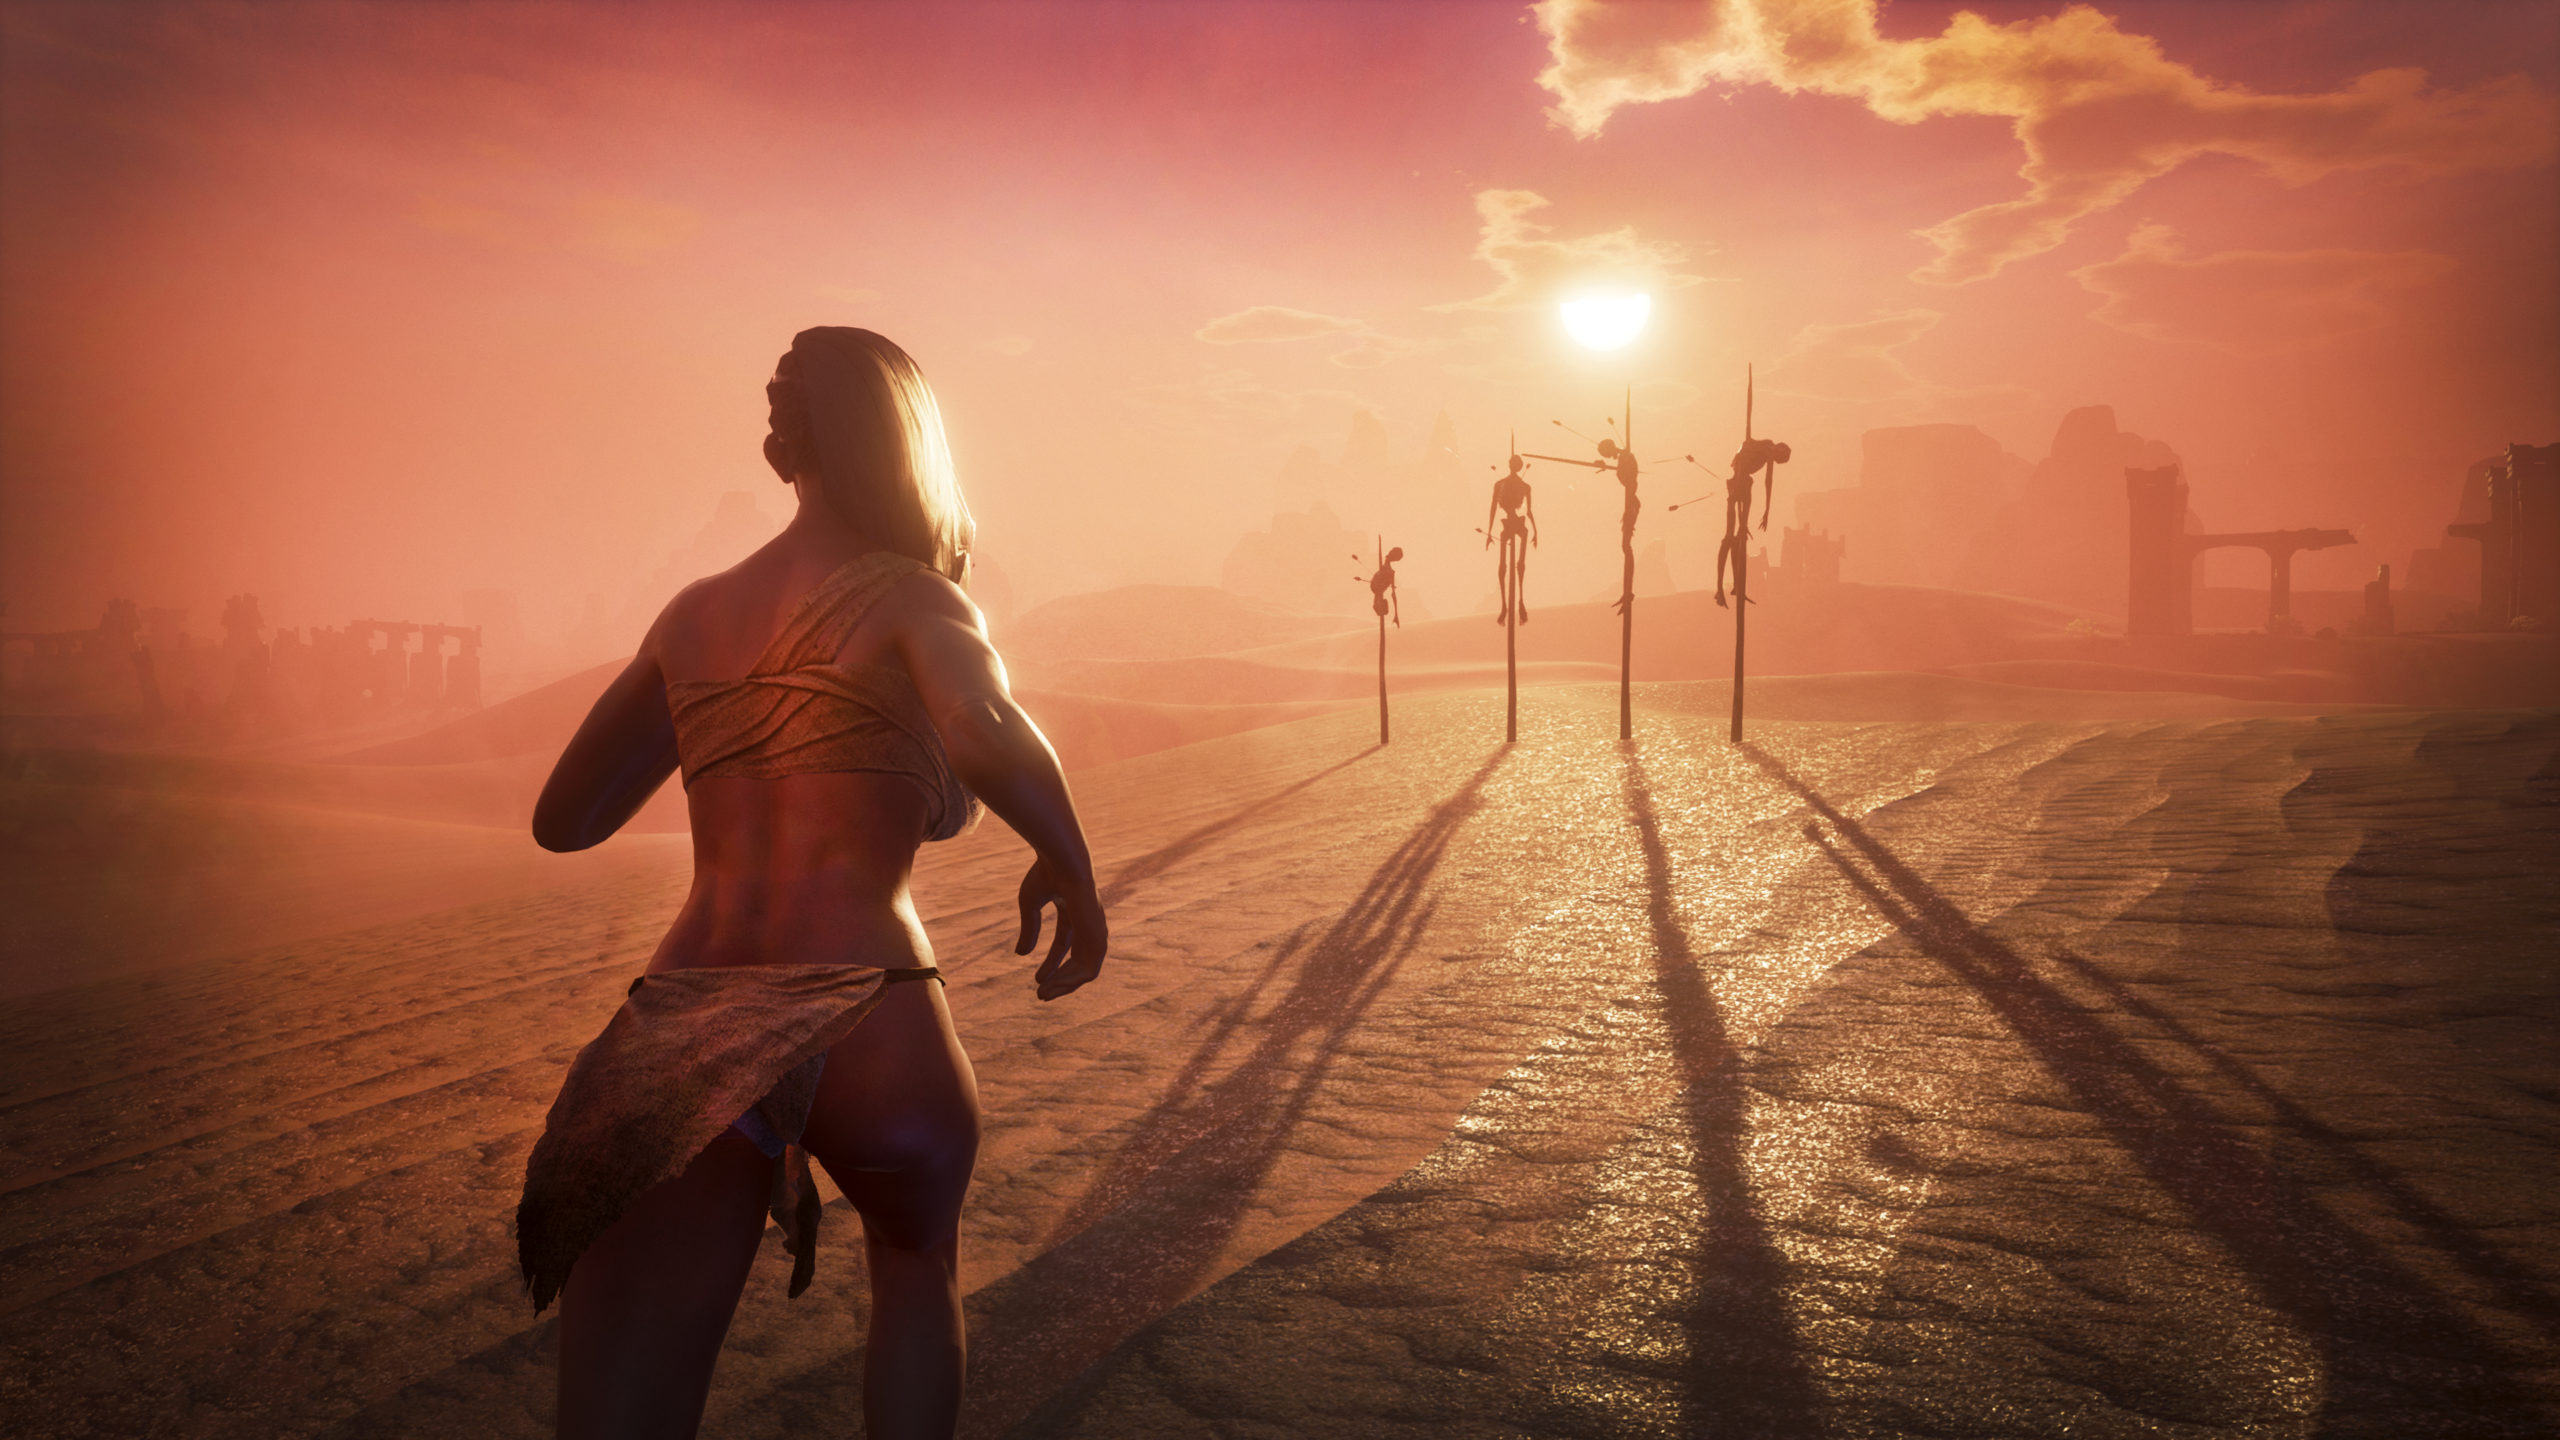 Open-World Conan Survival Game Coming To Xbox One, PC Early Access In January